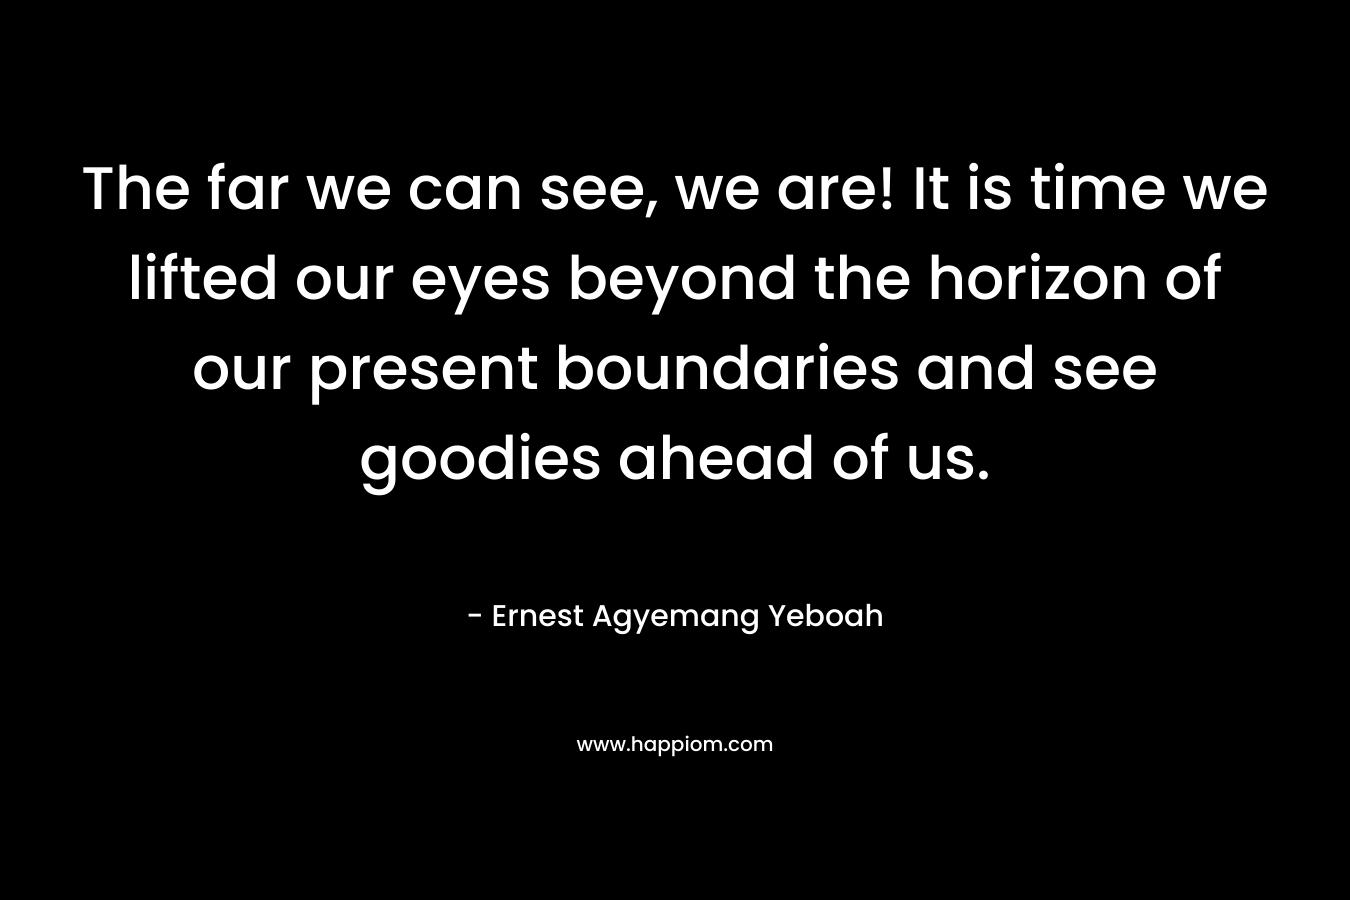 The far we can see, we are! It is time we lifted our eyes beyond the horizon of our present boundaries and see goodies ahead of us.